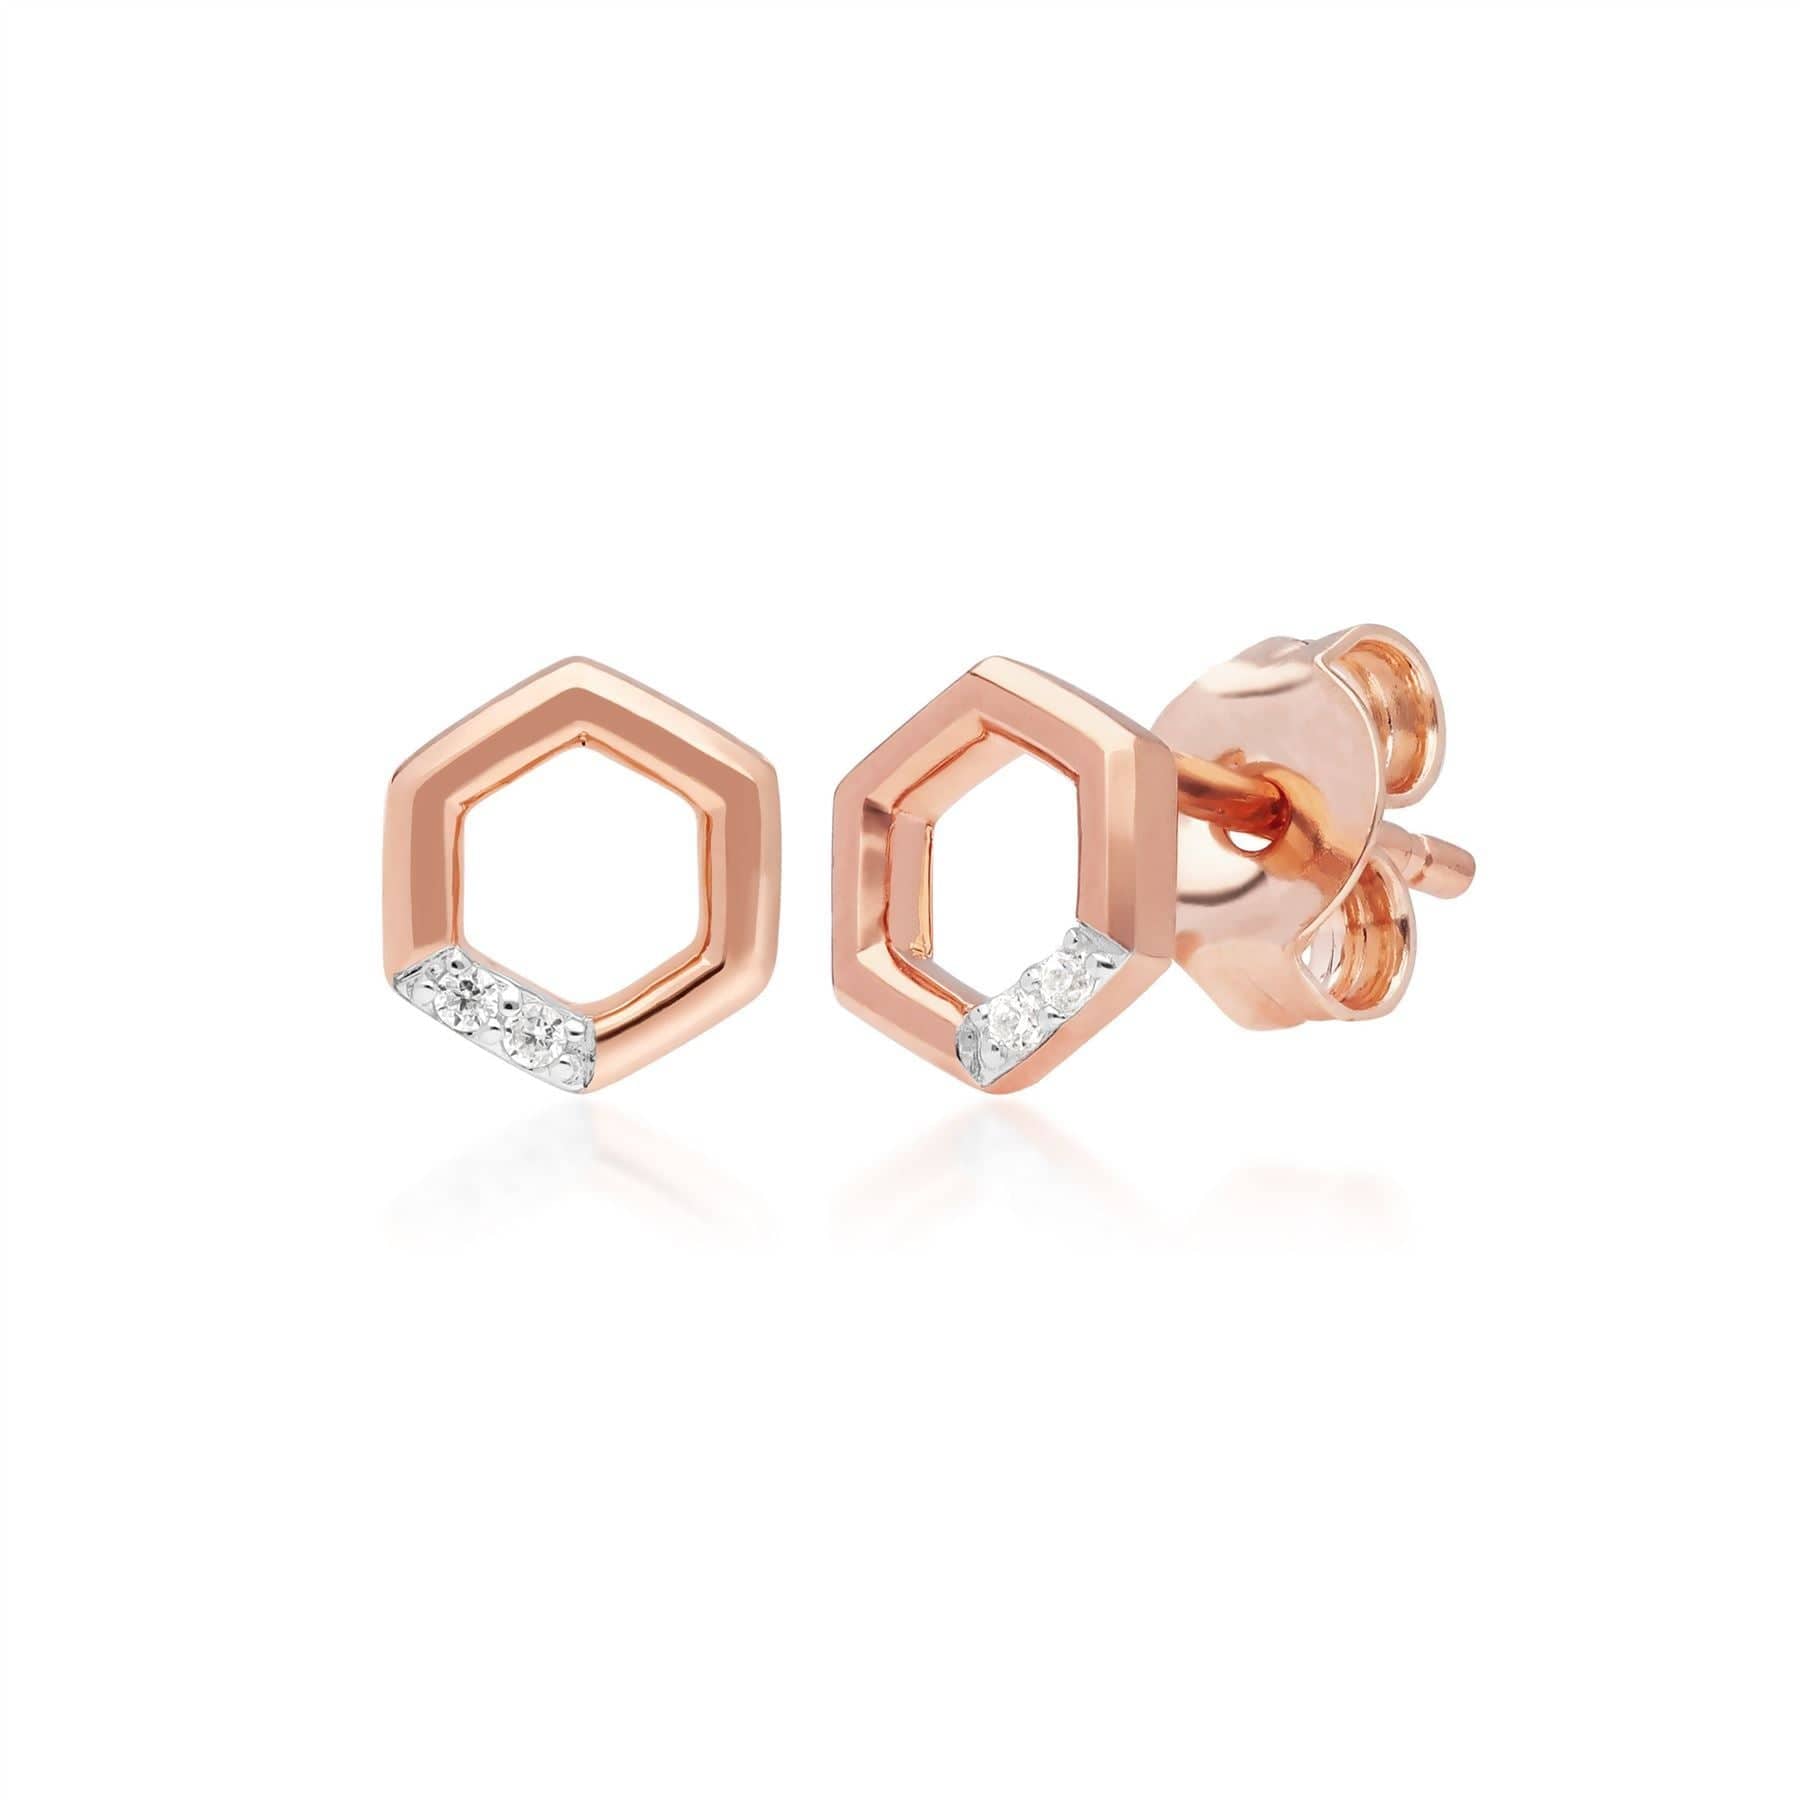 Diamond Pave Hexagon Stud Earrings Set in 9ct Rose Gold 